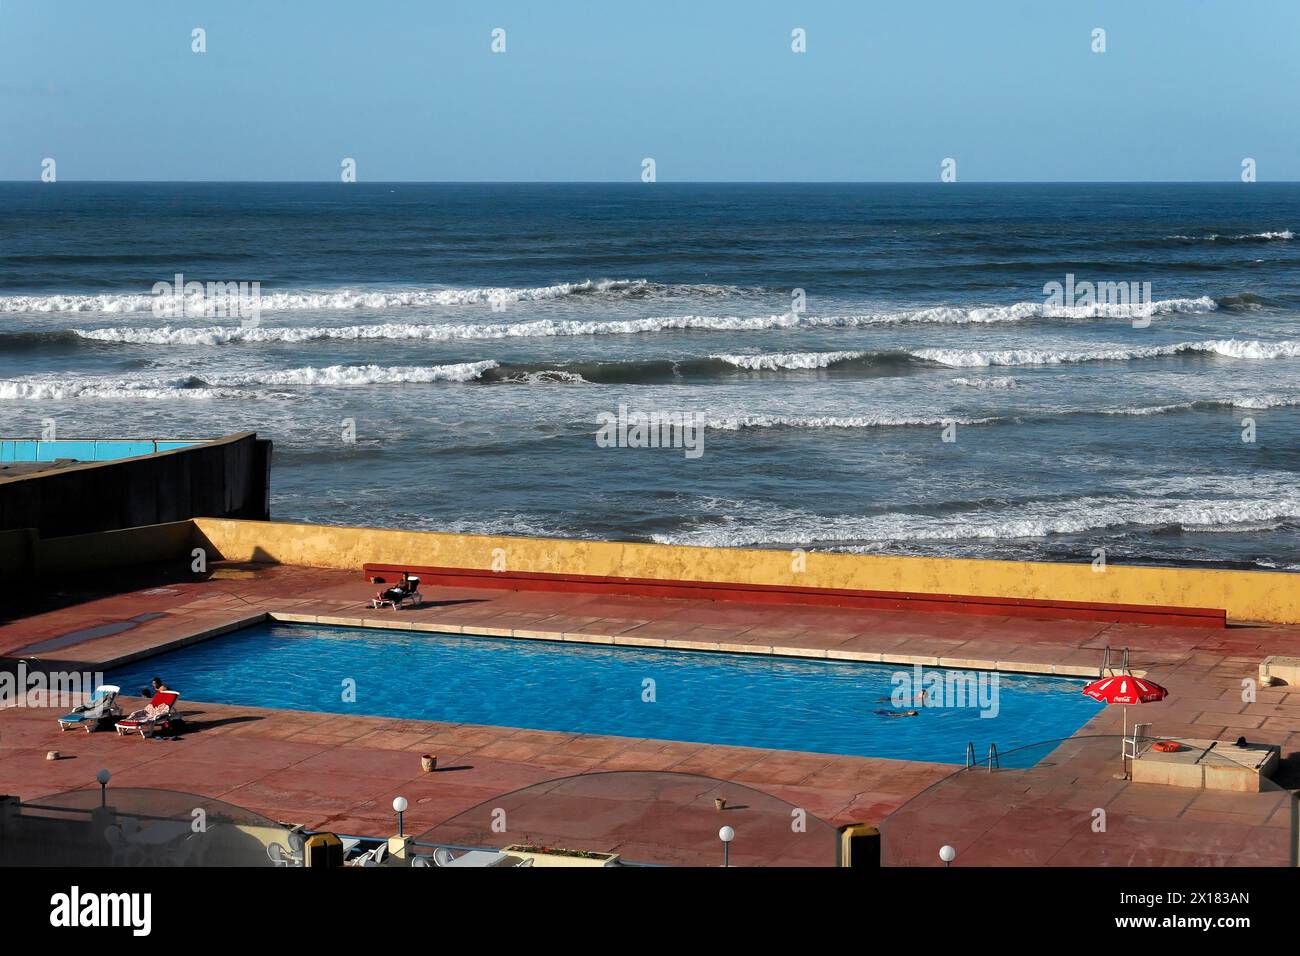 Essaouira, View of a swimming pool in front of the endless sea under a clear blue sky, Essaouira, Morocco Stock Photo